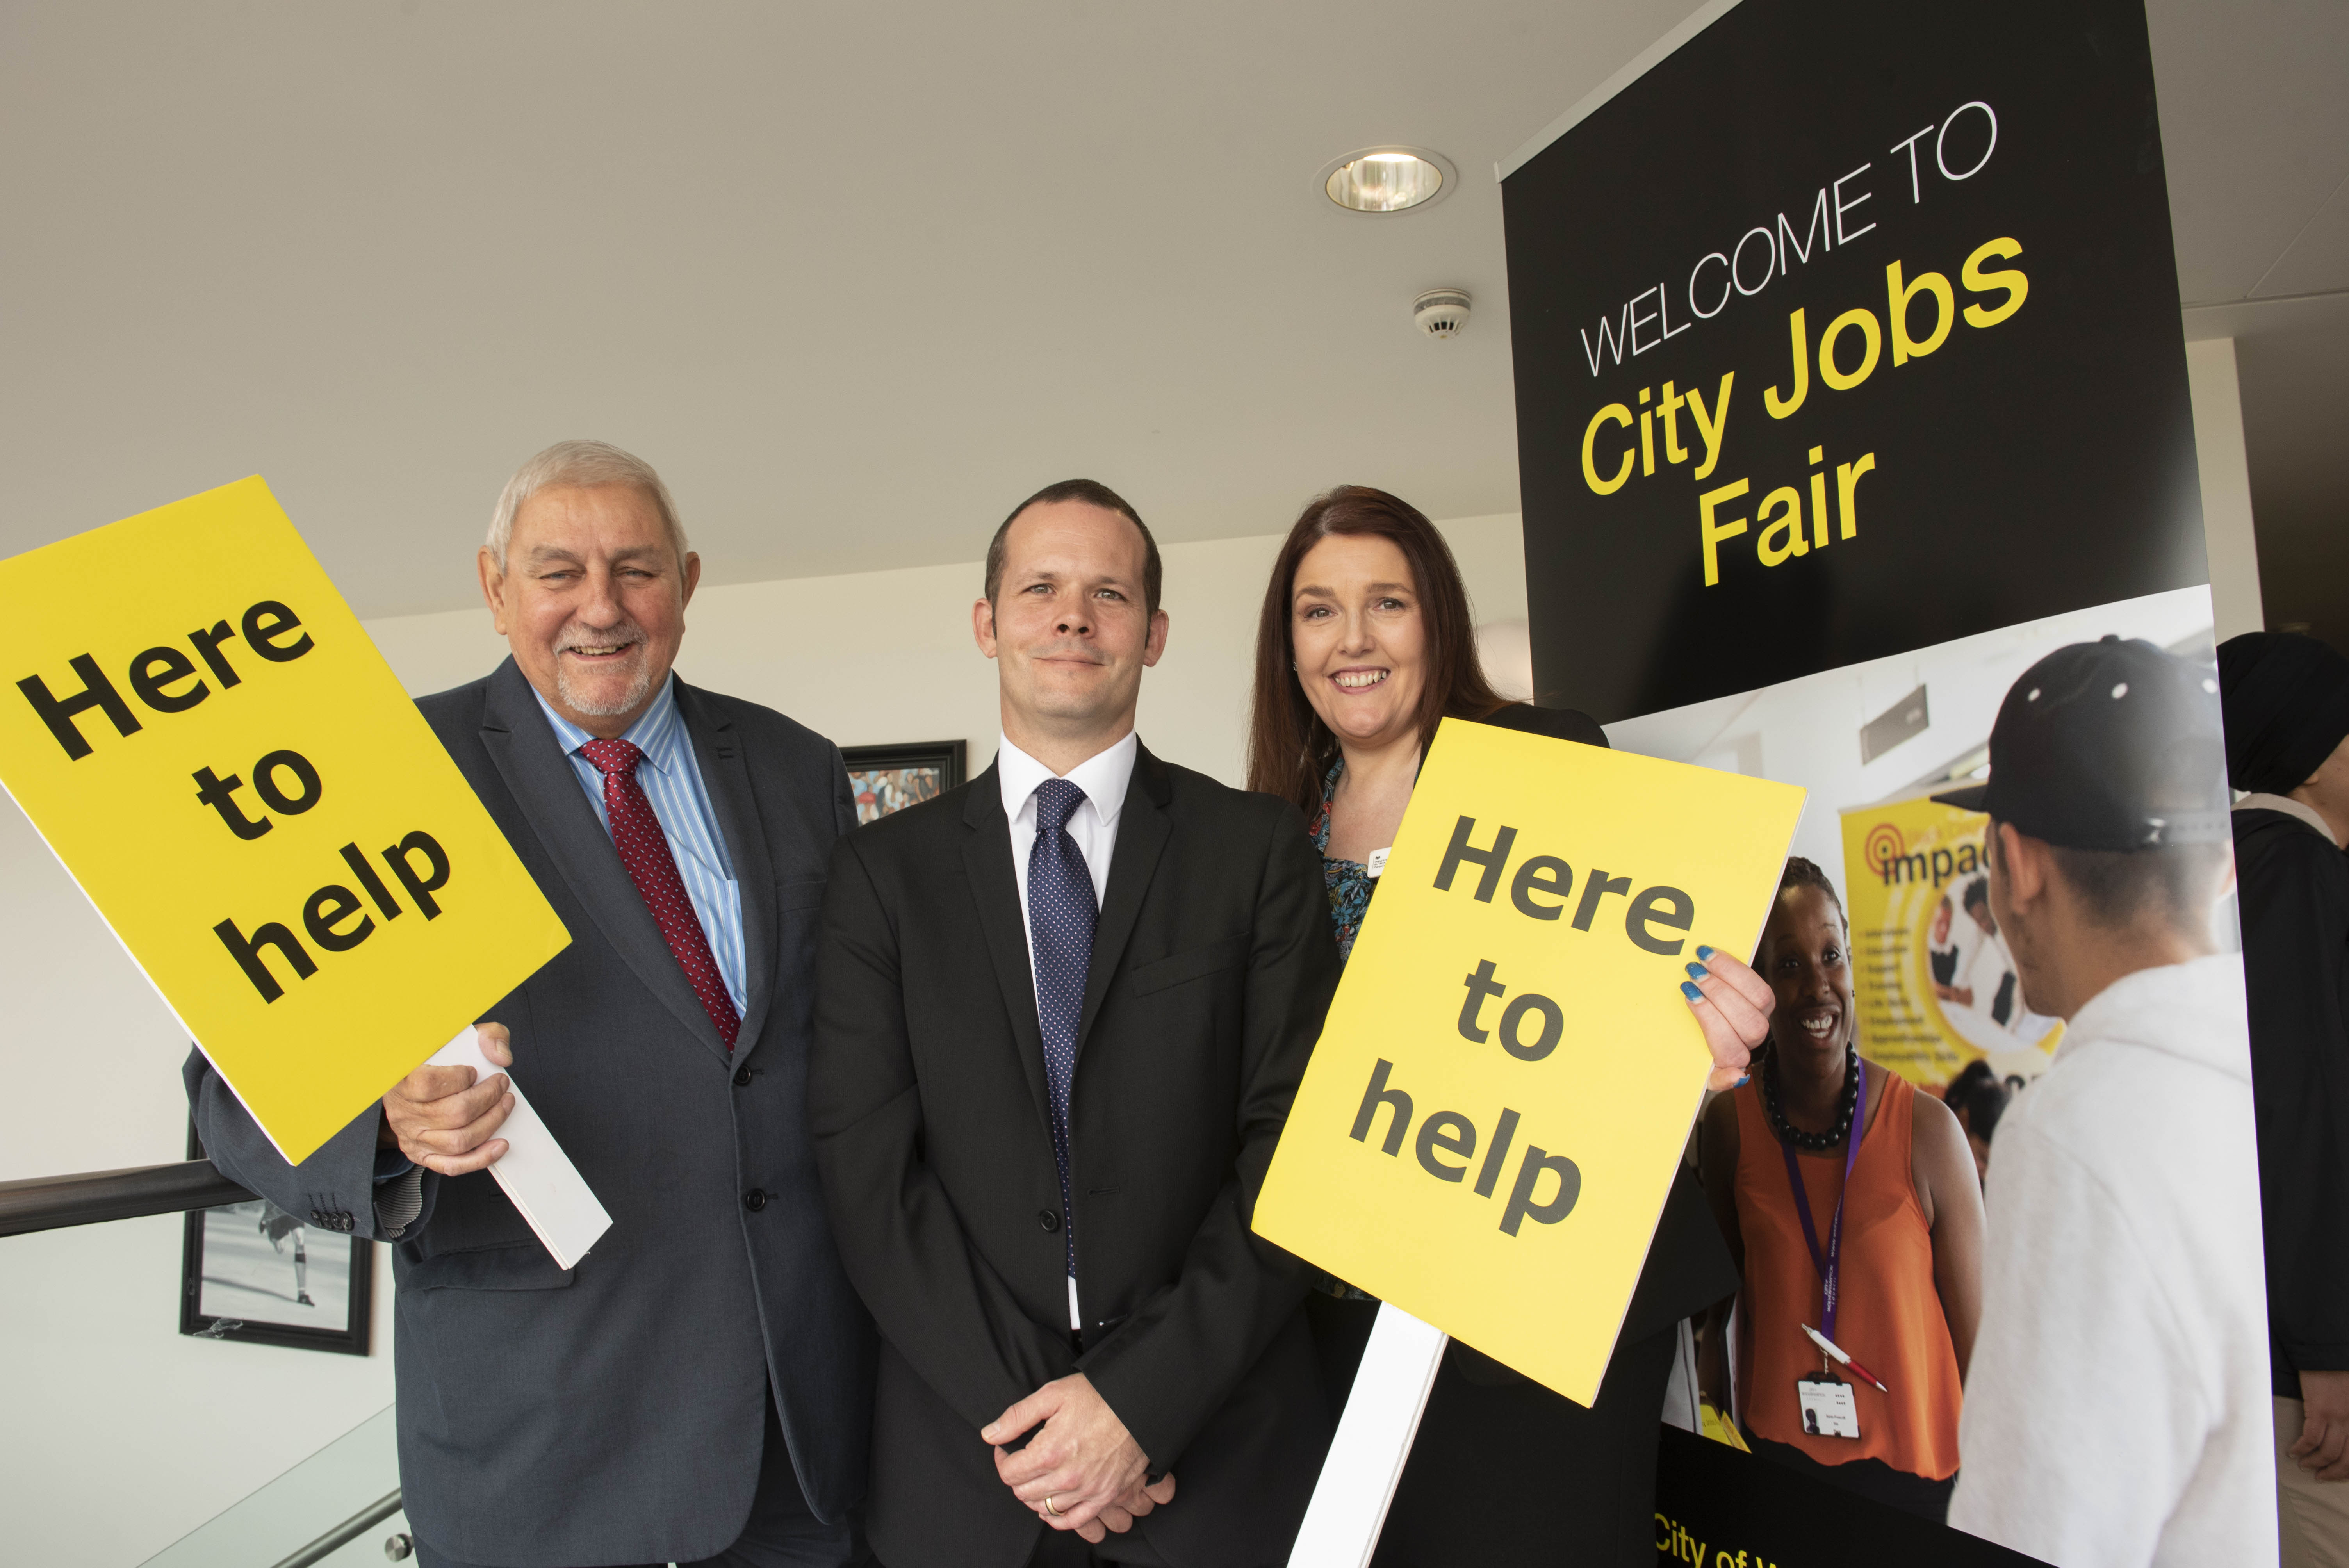 More than 1,000 job seekers benefit from City Jobs Fair